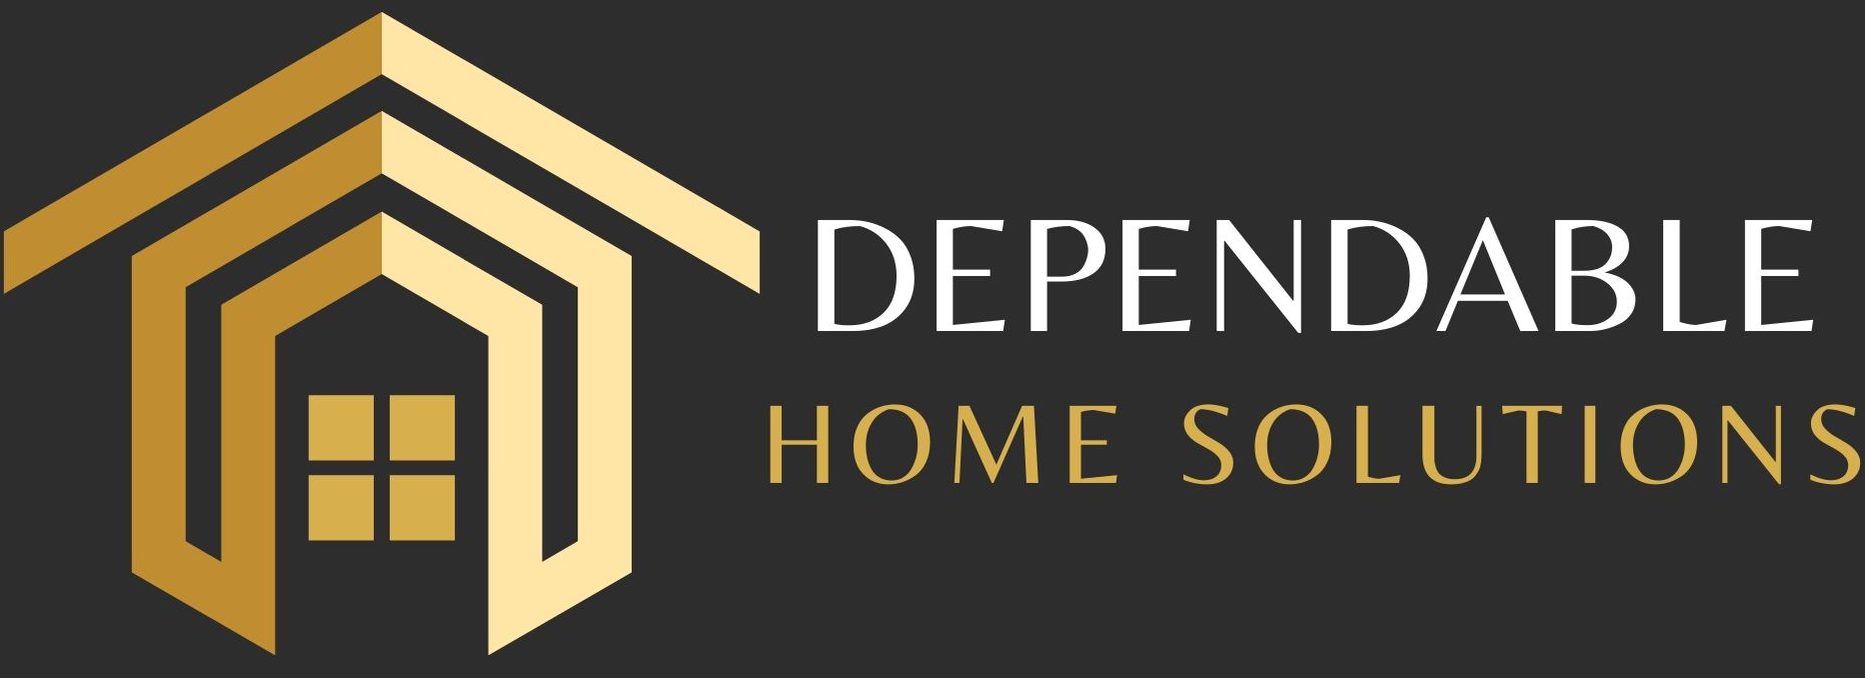 dependable home solutions logo